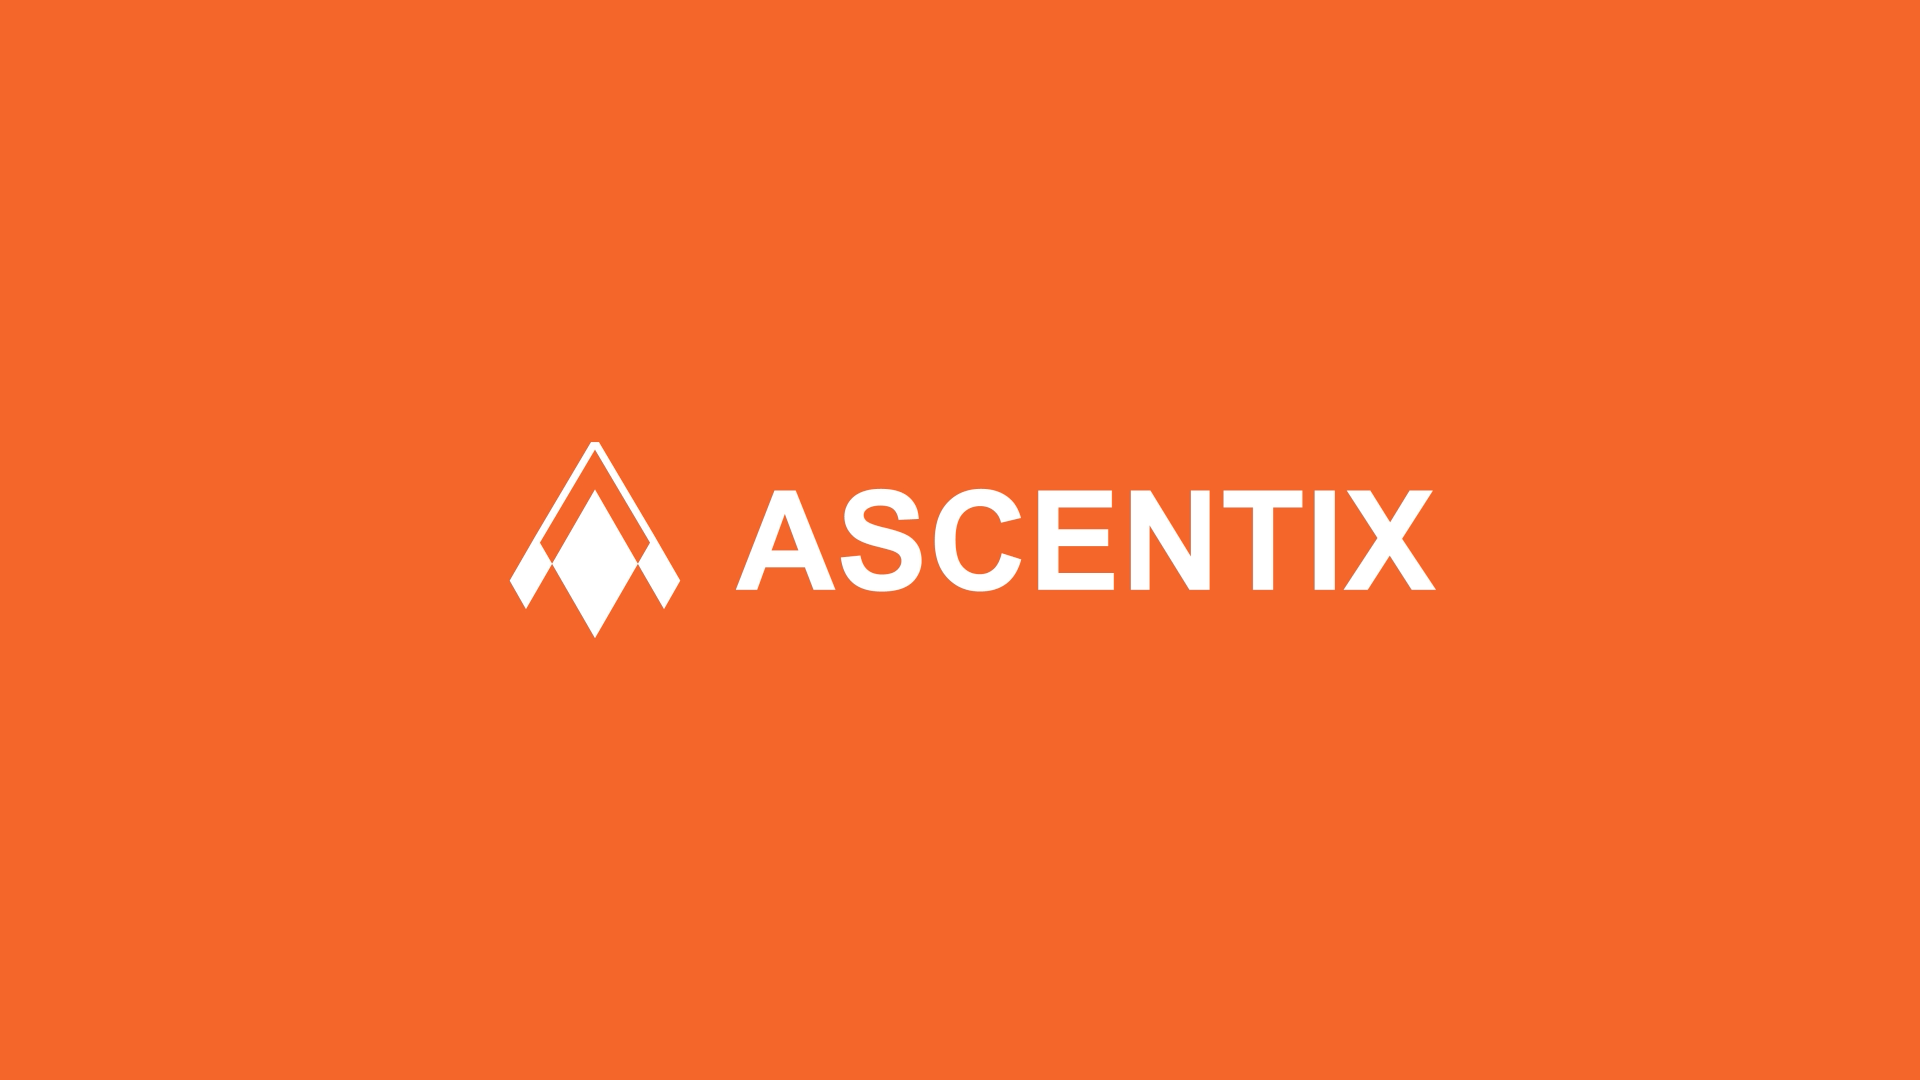 Image of ascentix logo changing colors